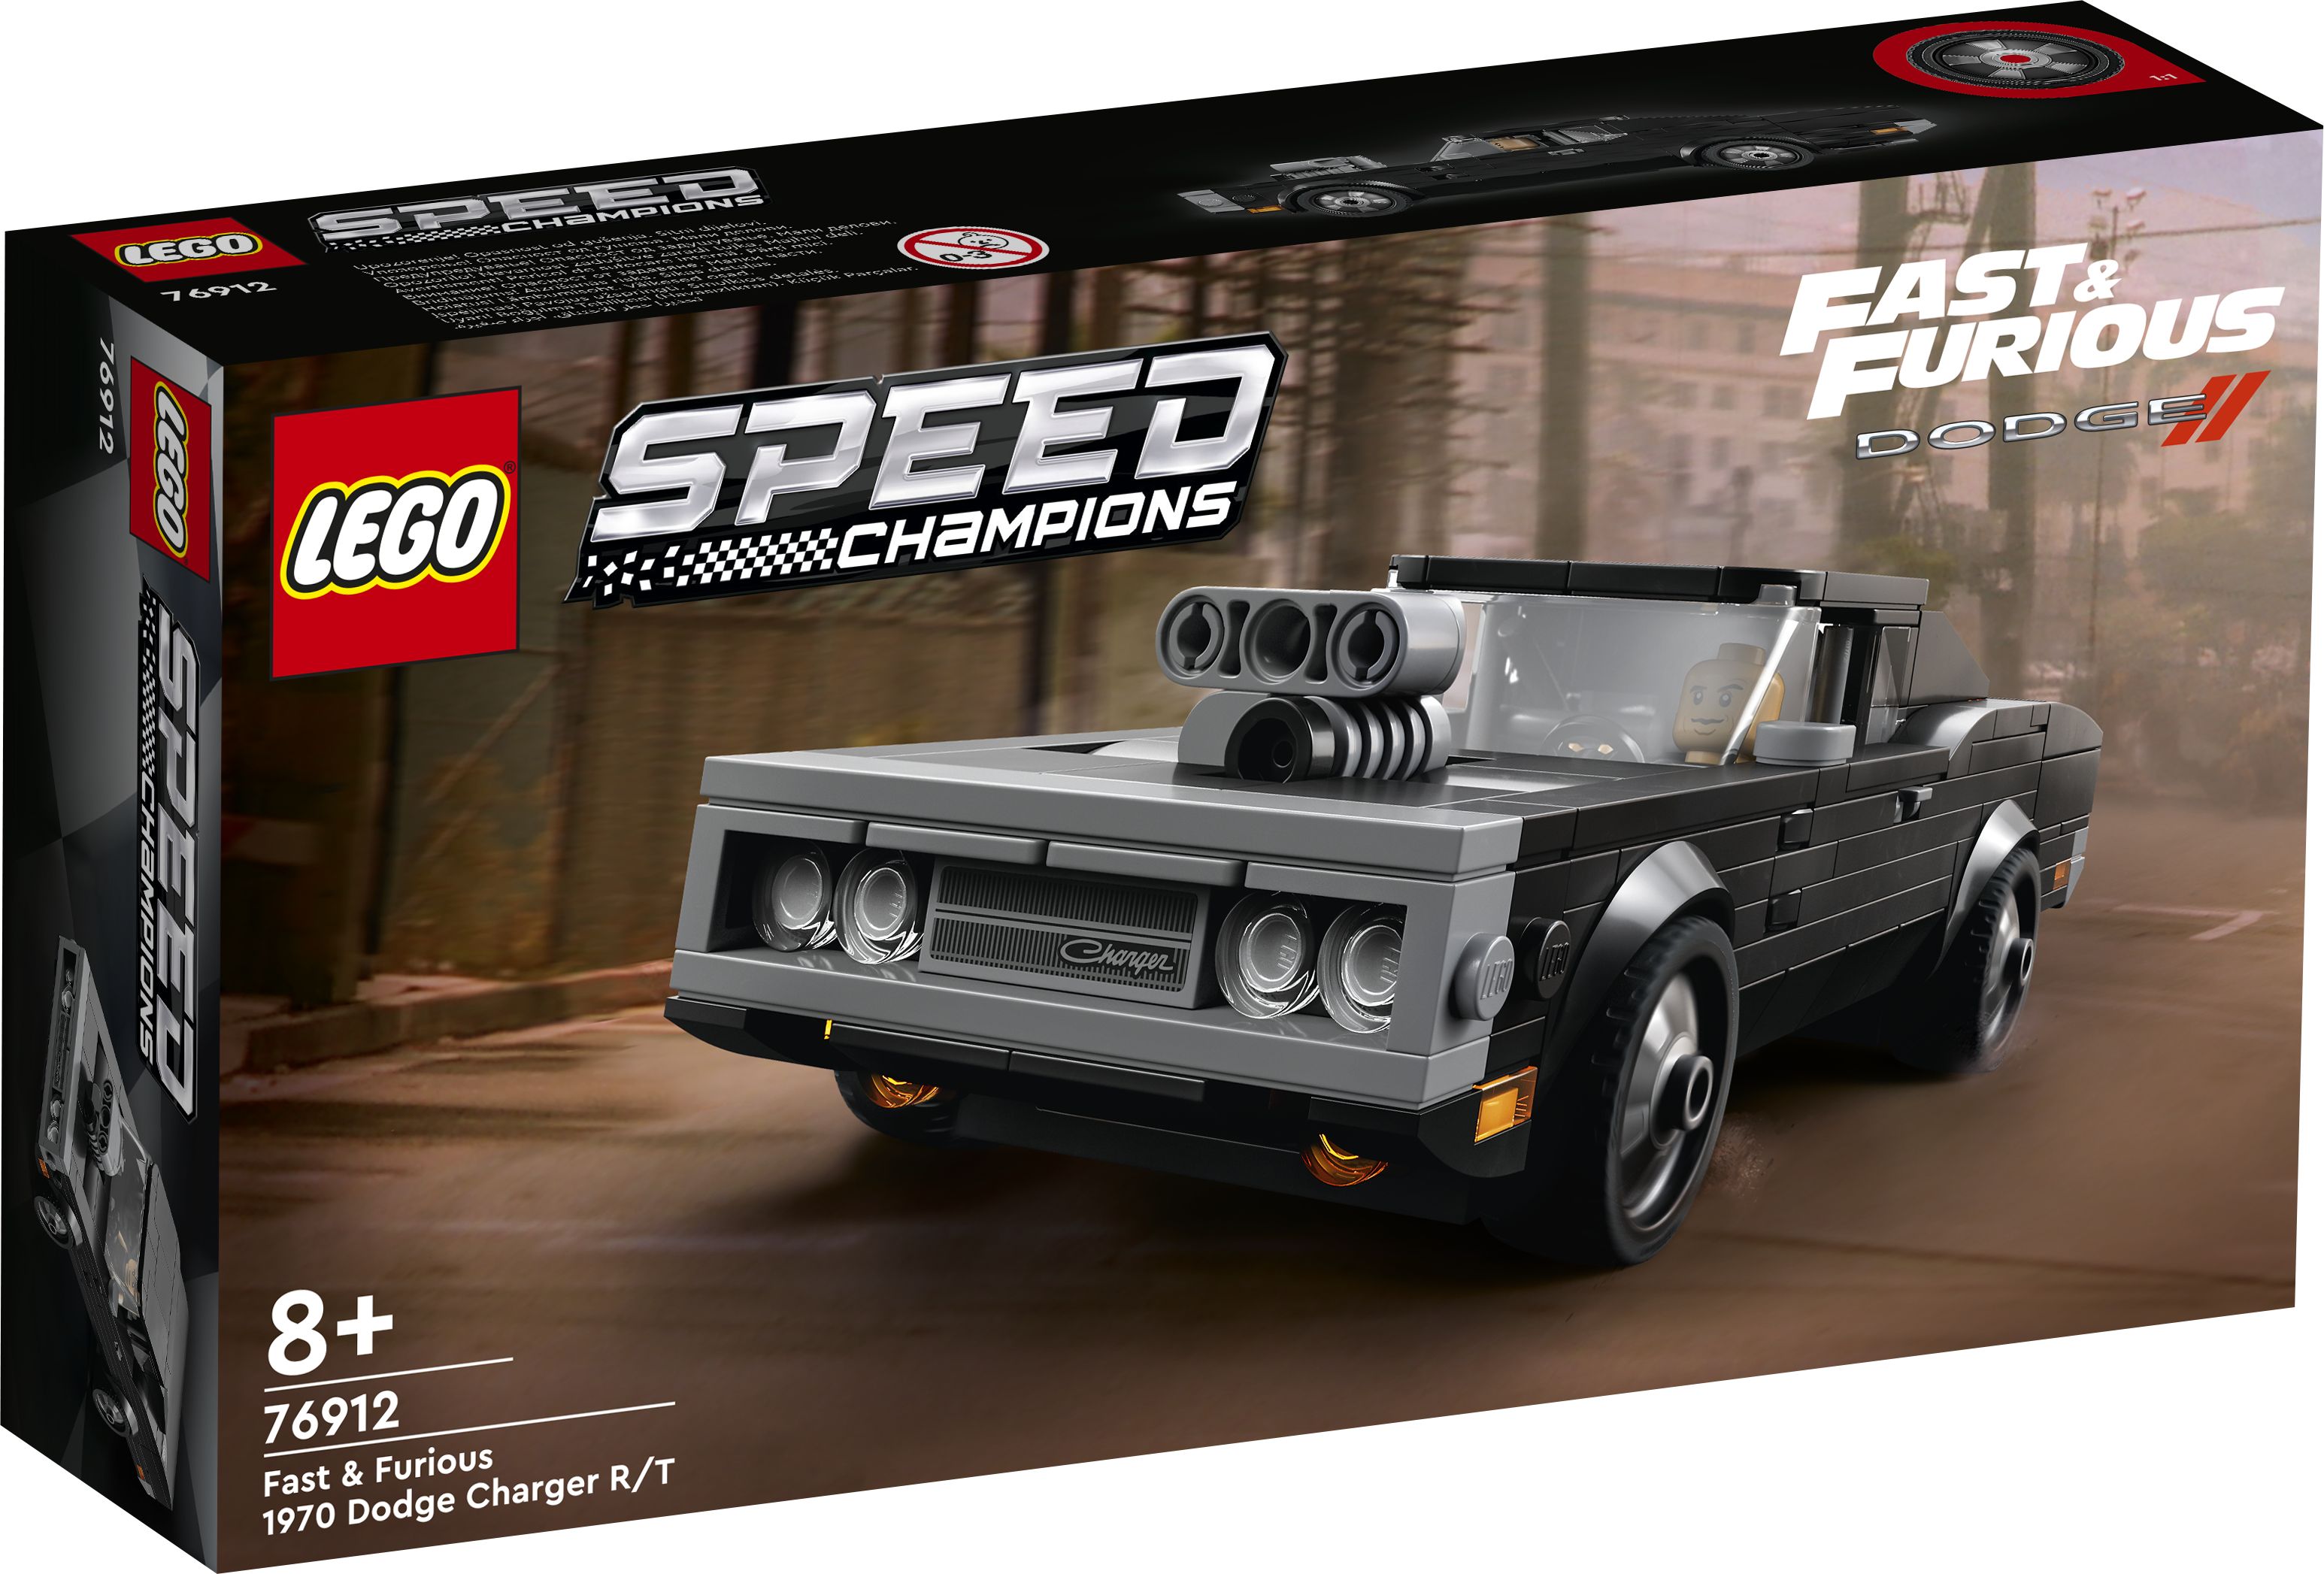 LEGO Speed Champions 76912 Fast & Furious 1970 Dodge Charger R/T LEGO_76912_Box1_v29.jpg